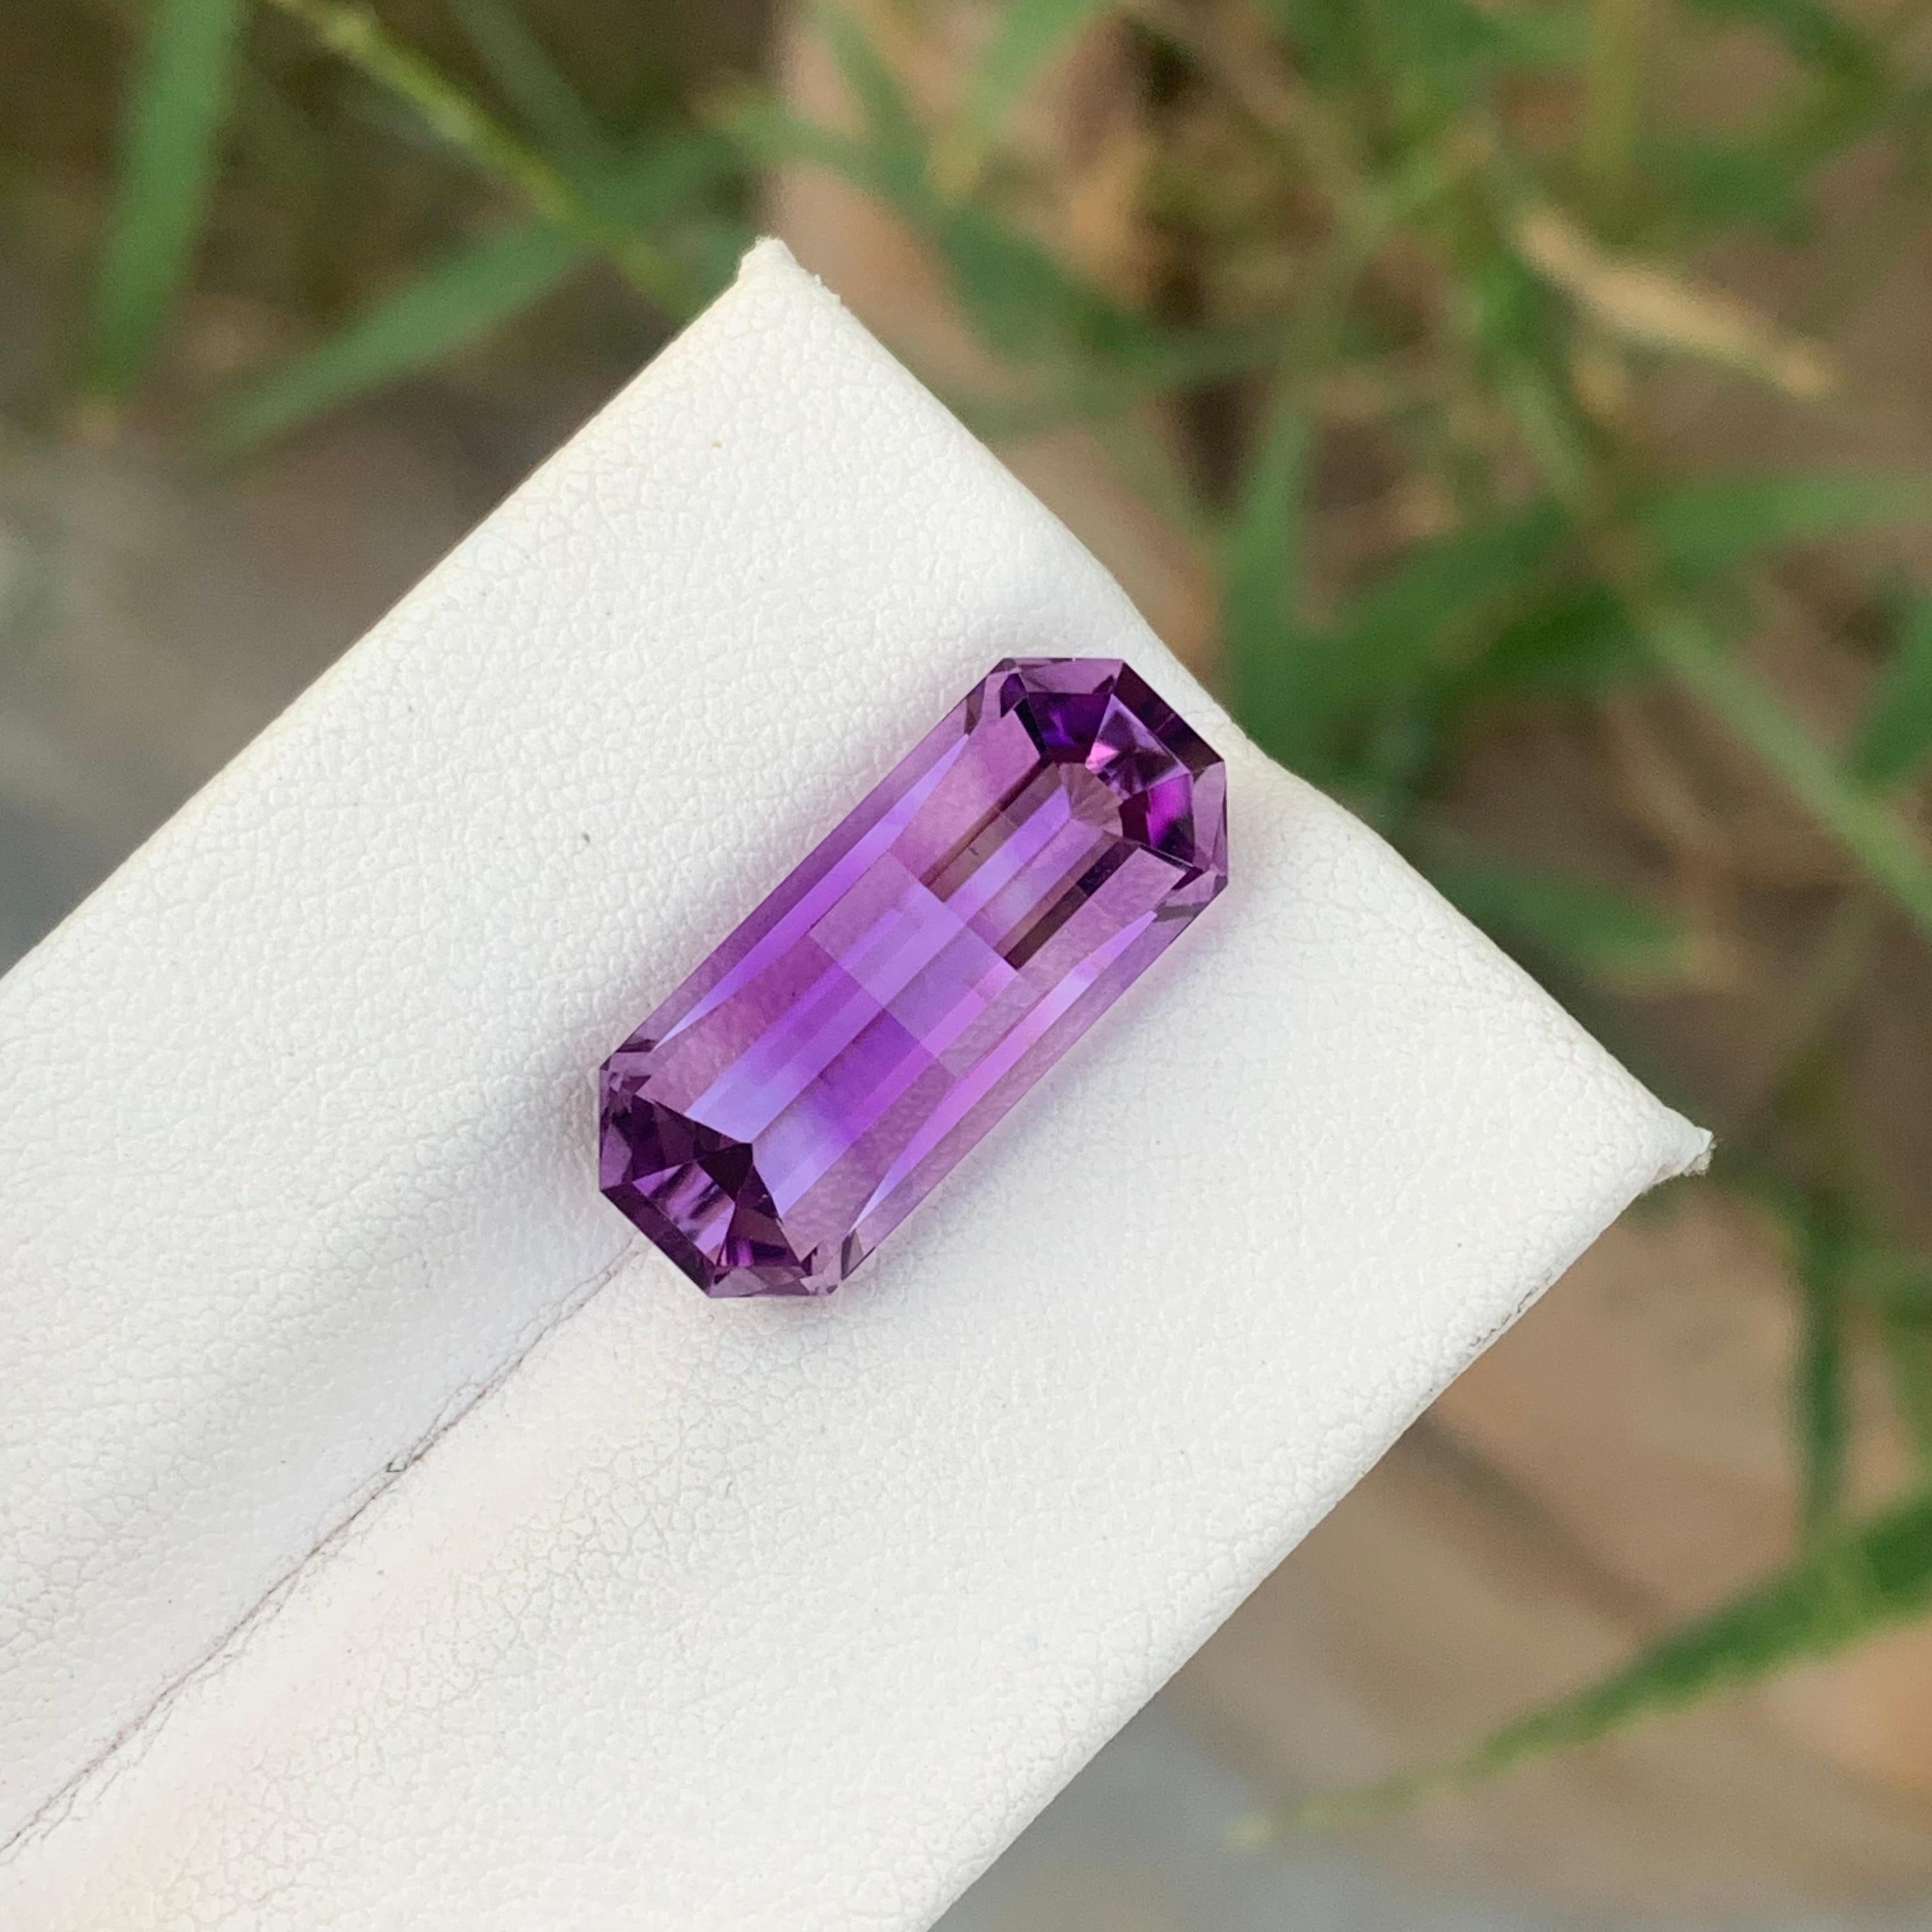 8.25cts Natural Loose Amethyst Gemstone Pixel Pixelated Cut From Brazil Mine For Sale 6